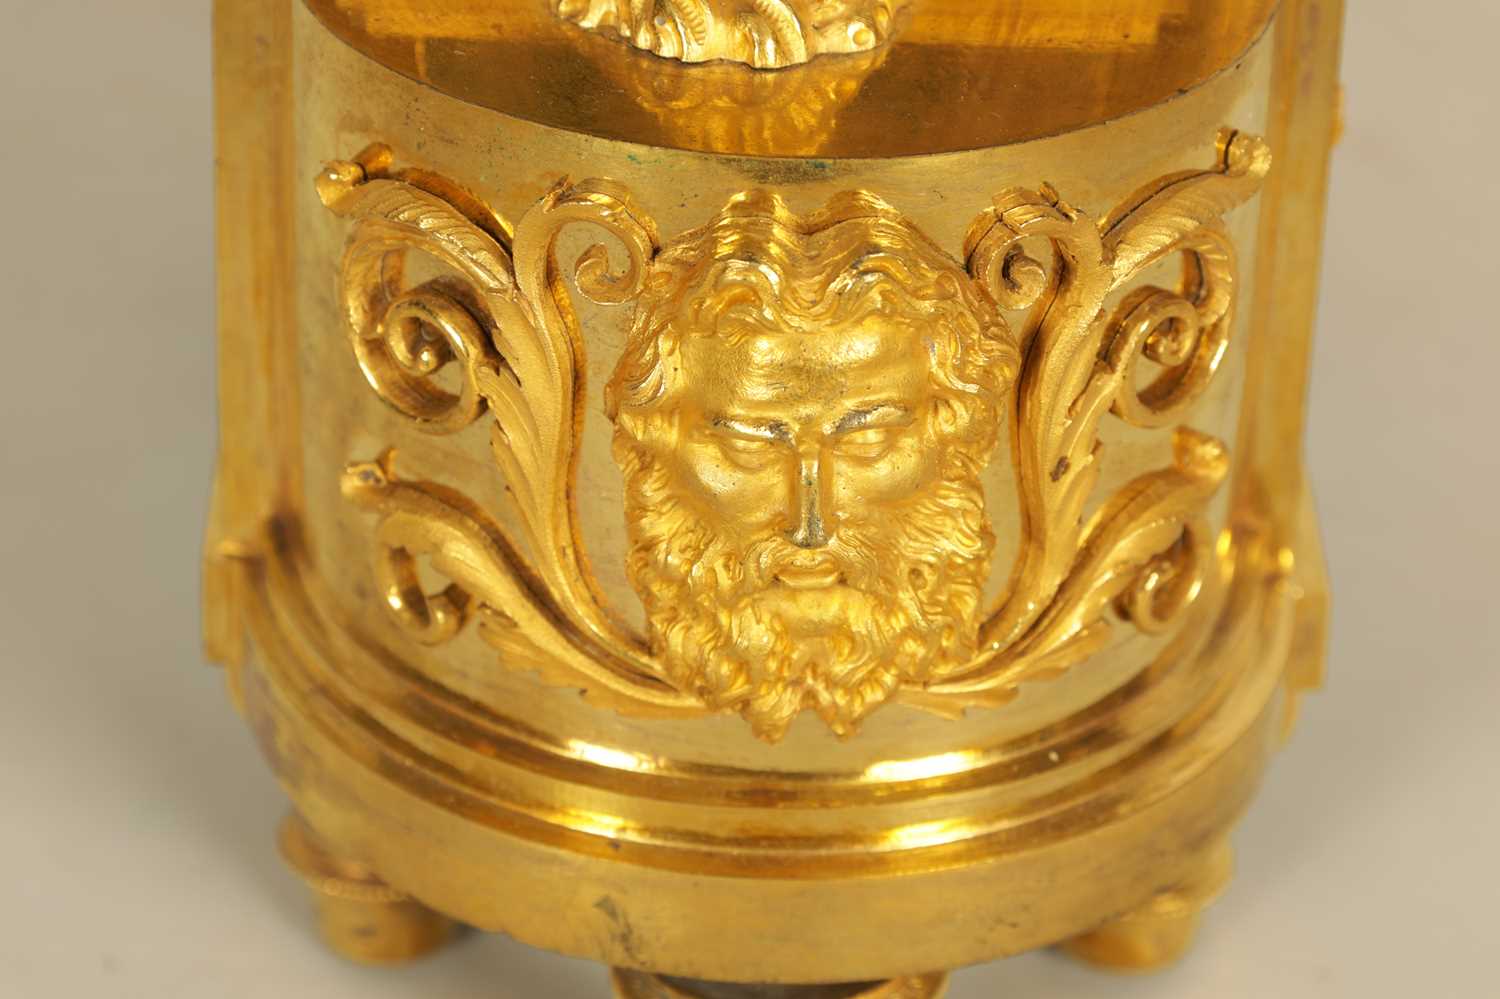 AN EARLY 19TH CENTURY FRENCH EMPIRE ORMOLU FIGURAL MANTEL CLOCK - Image 10 of 12